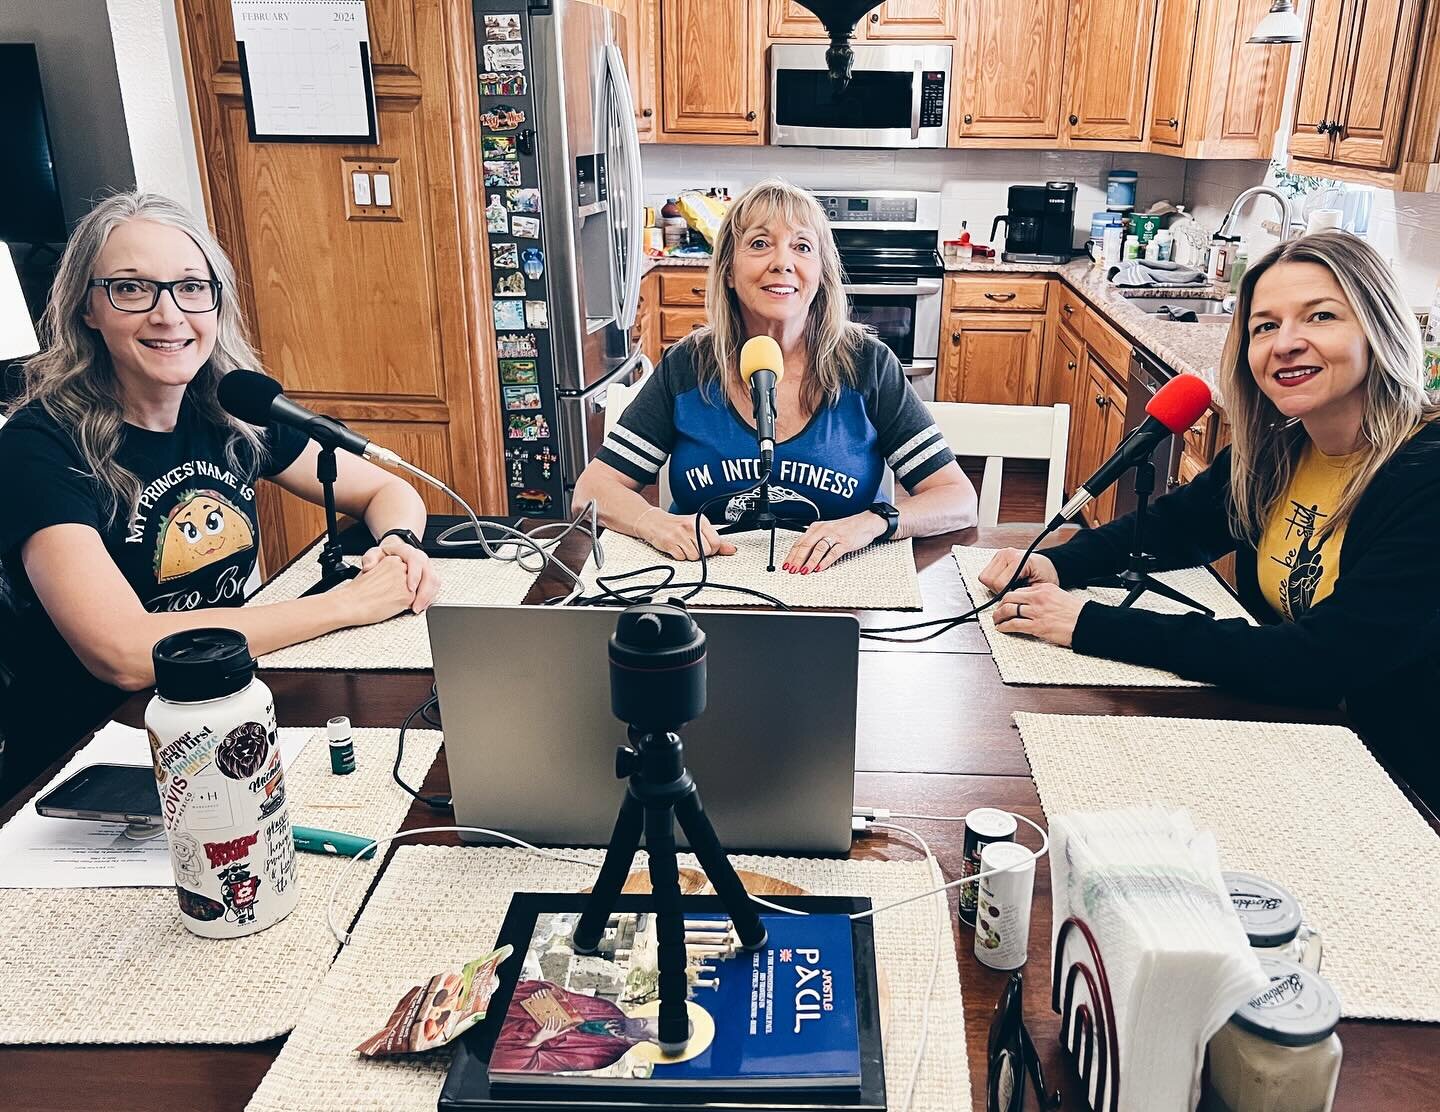 That&rsquo;s a wrap! Guilty or Not Guilty mid season series is in the books! Dropping in March! Plus videos for our YouTube channel! 

#truecrime #truecrimecommunity #truecrimepodcast